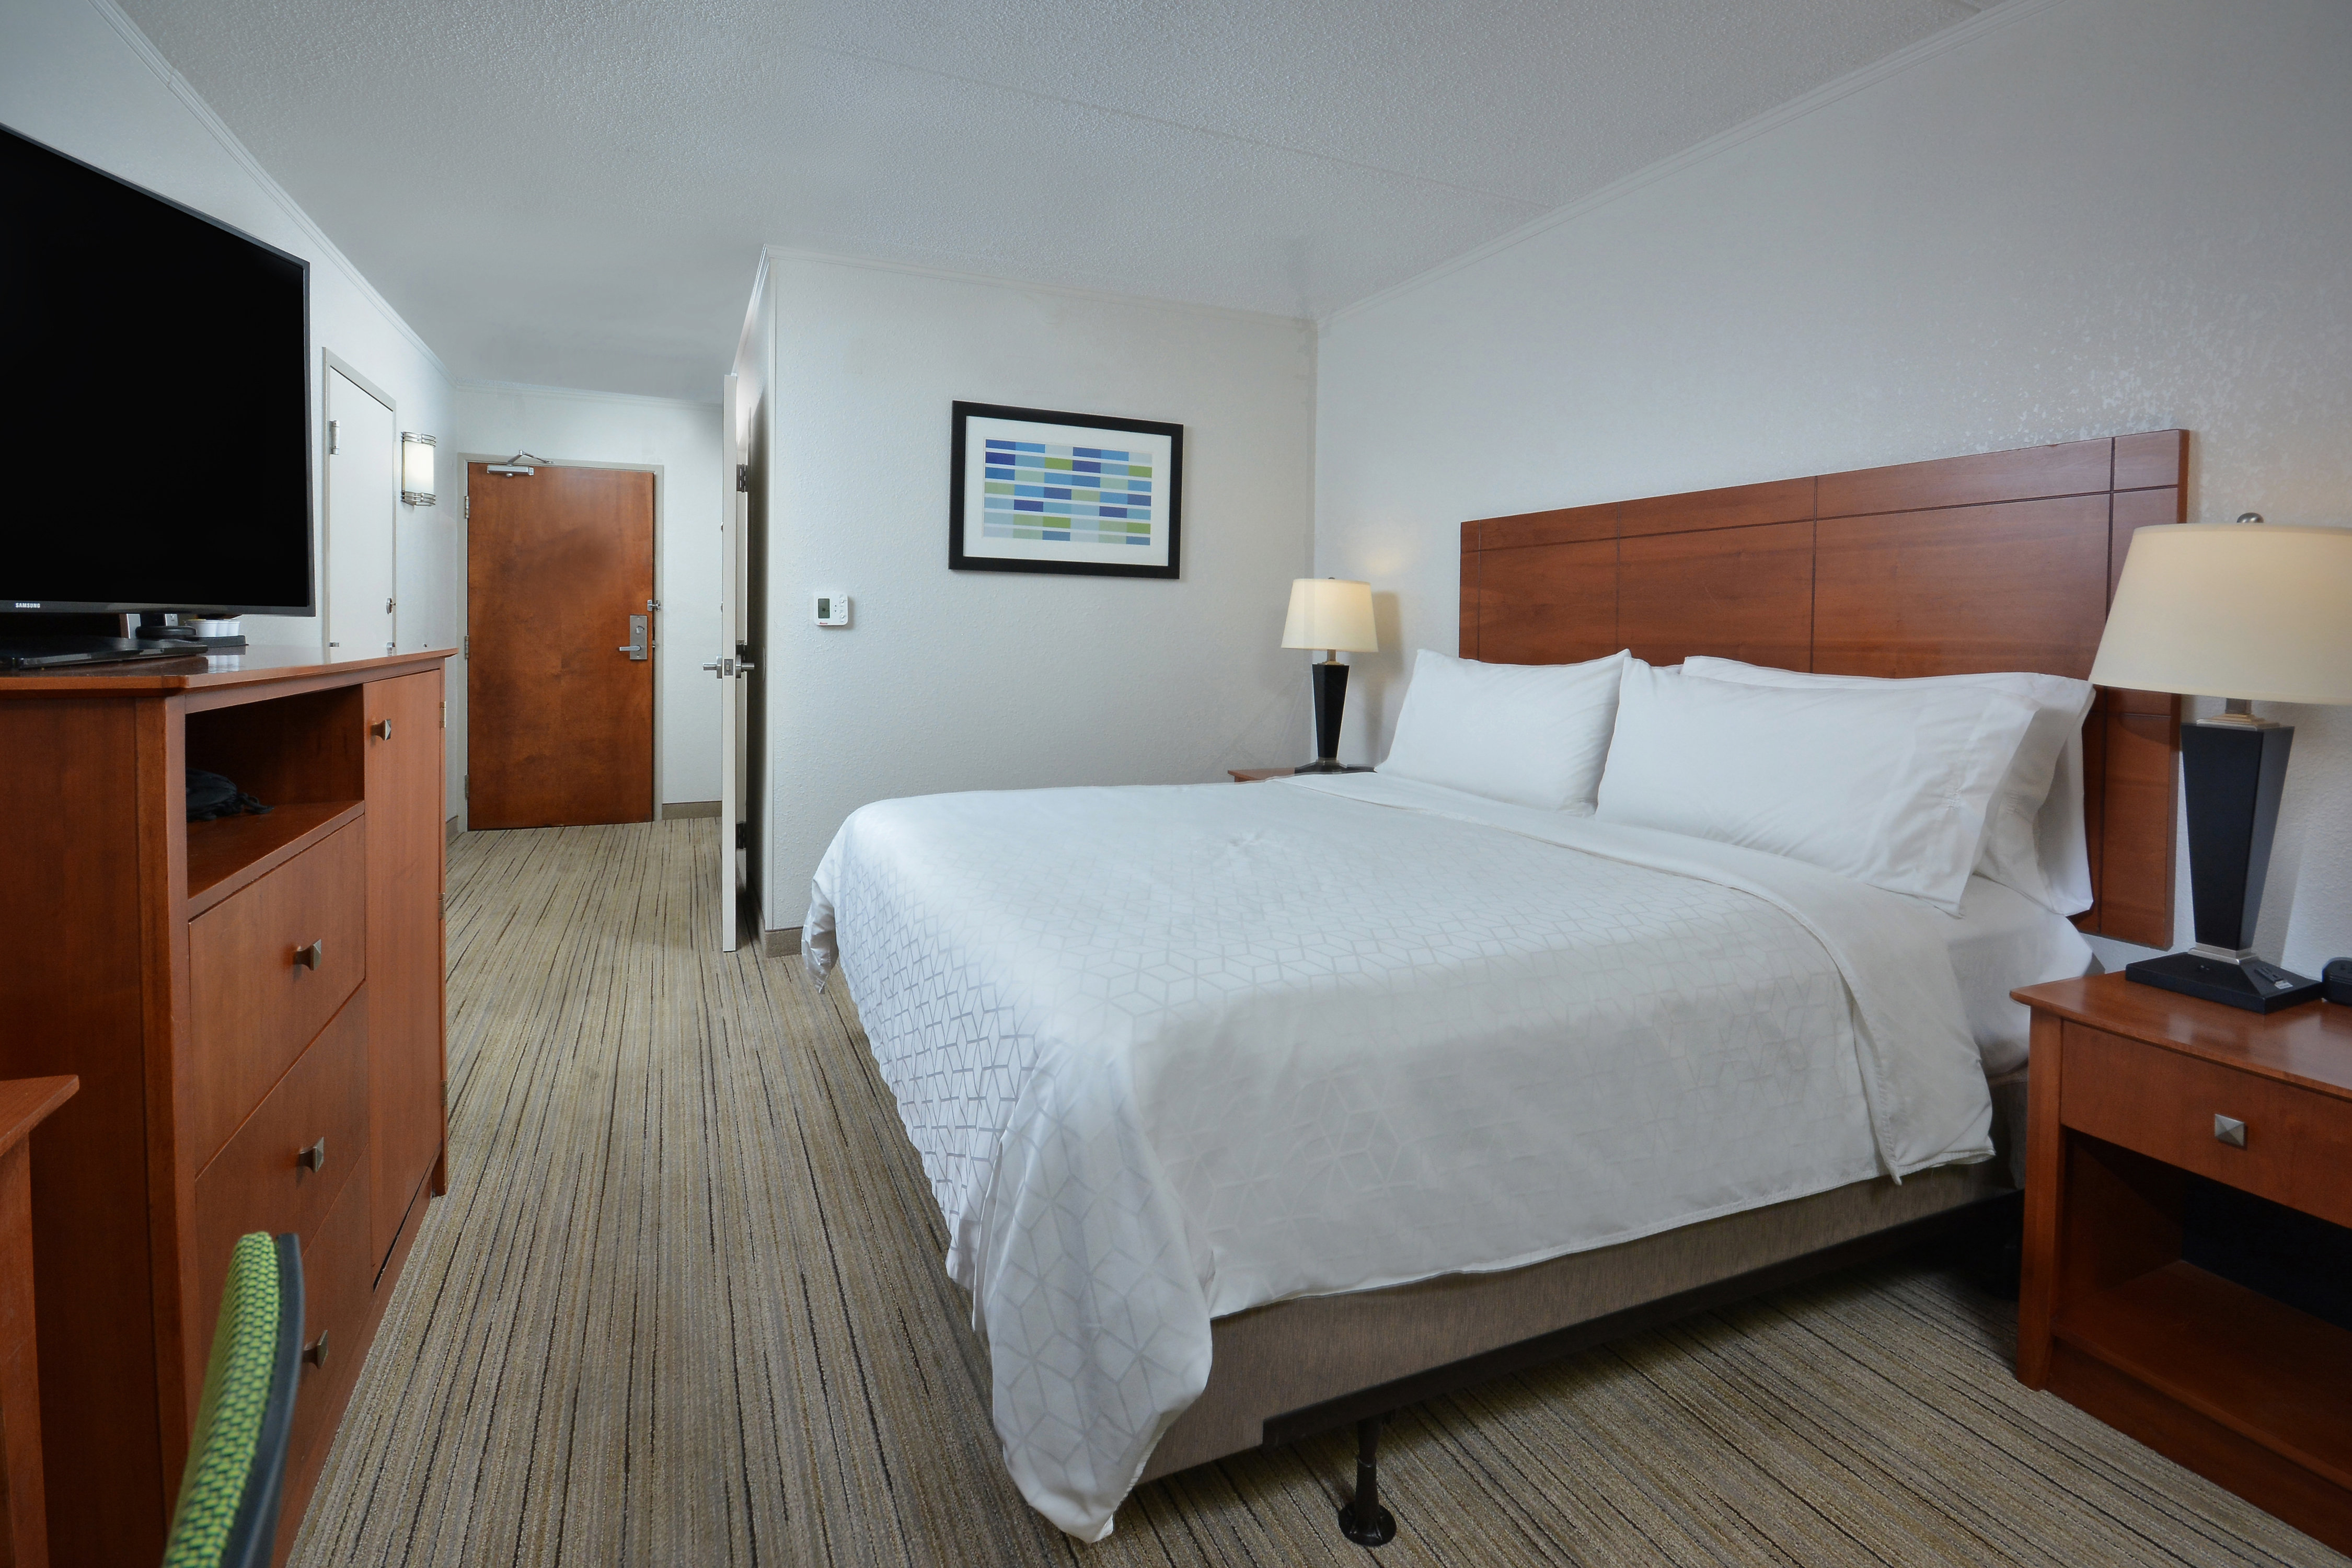 A clean and quiet room awaits you at our Lynchburg accommodations.